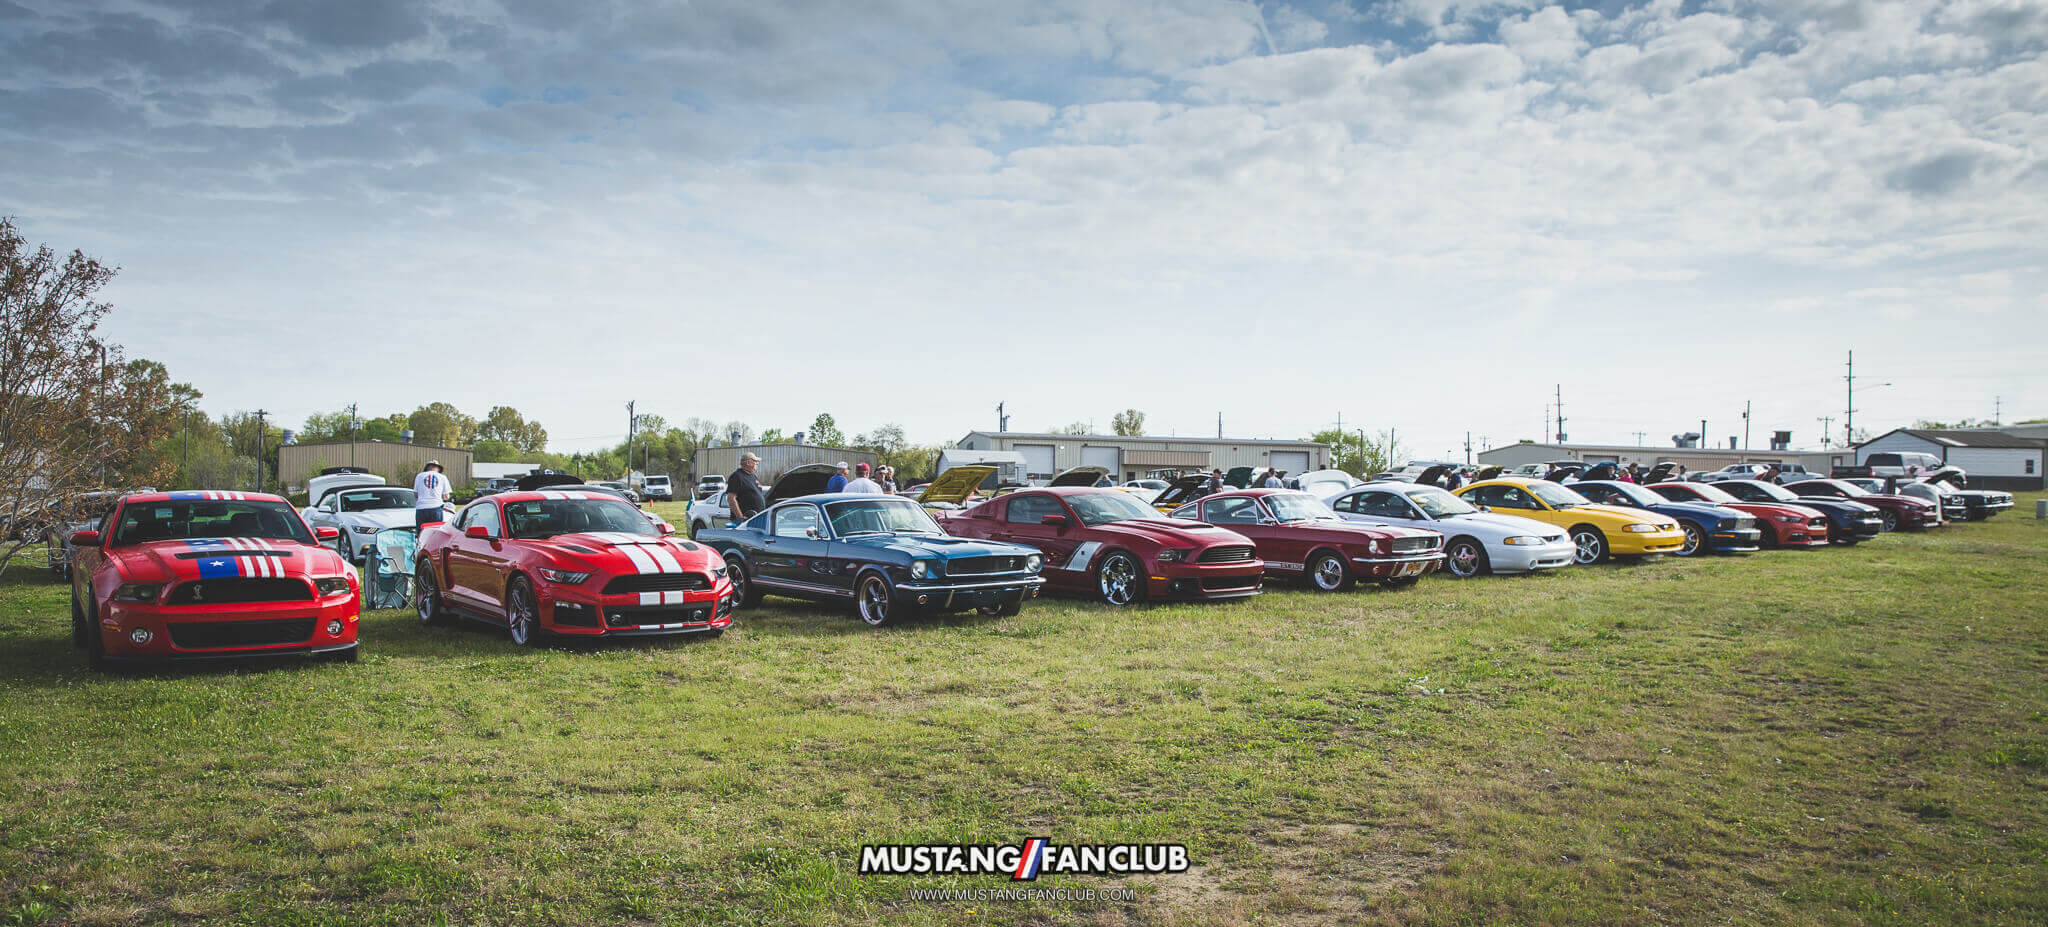 national mustang day 2018